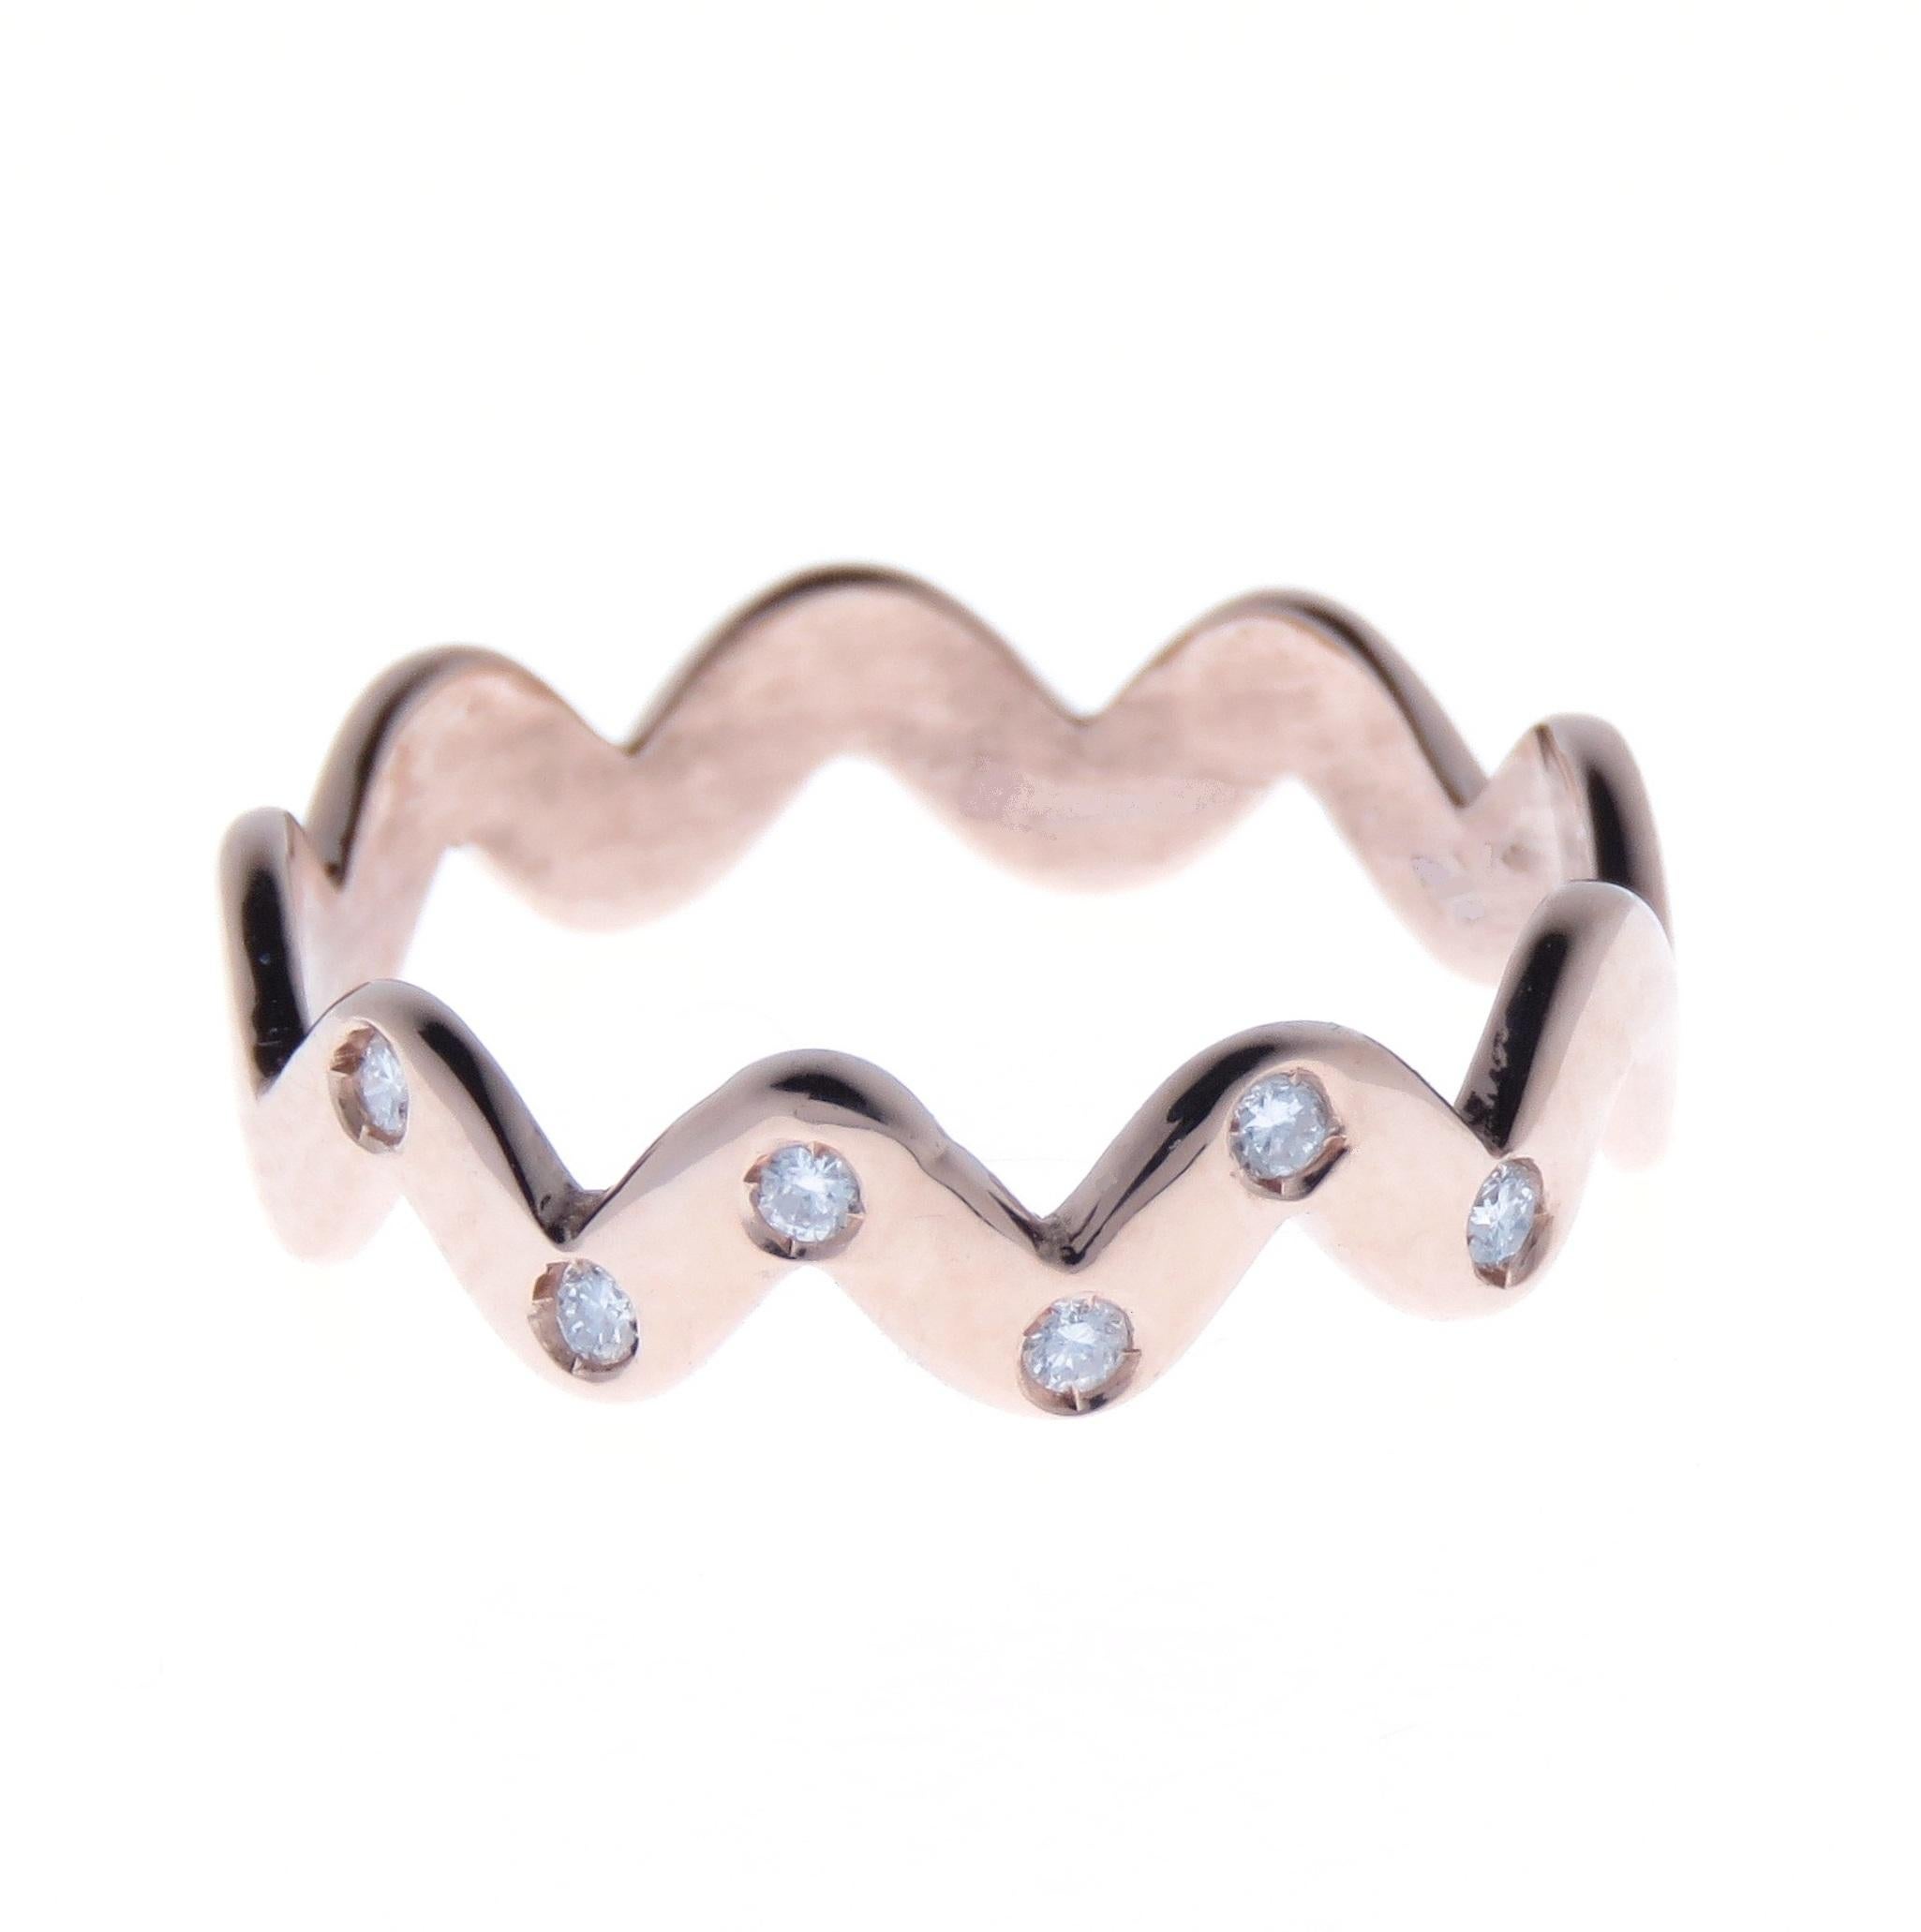 Zig zag ring in 9 karat rose gold with natural briliant cut white diamonds.  This ring can also be stacked with the 9 karat white gold zig zag ring. The price is for one ring.
US finger size is 5 3/4, French size 51, Italian size 11, each ring can